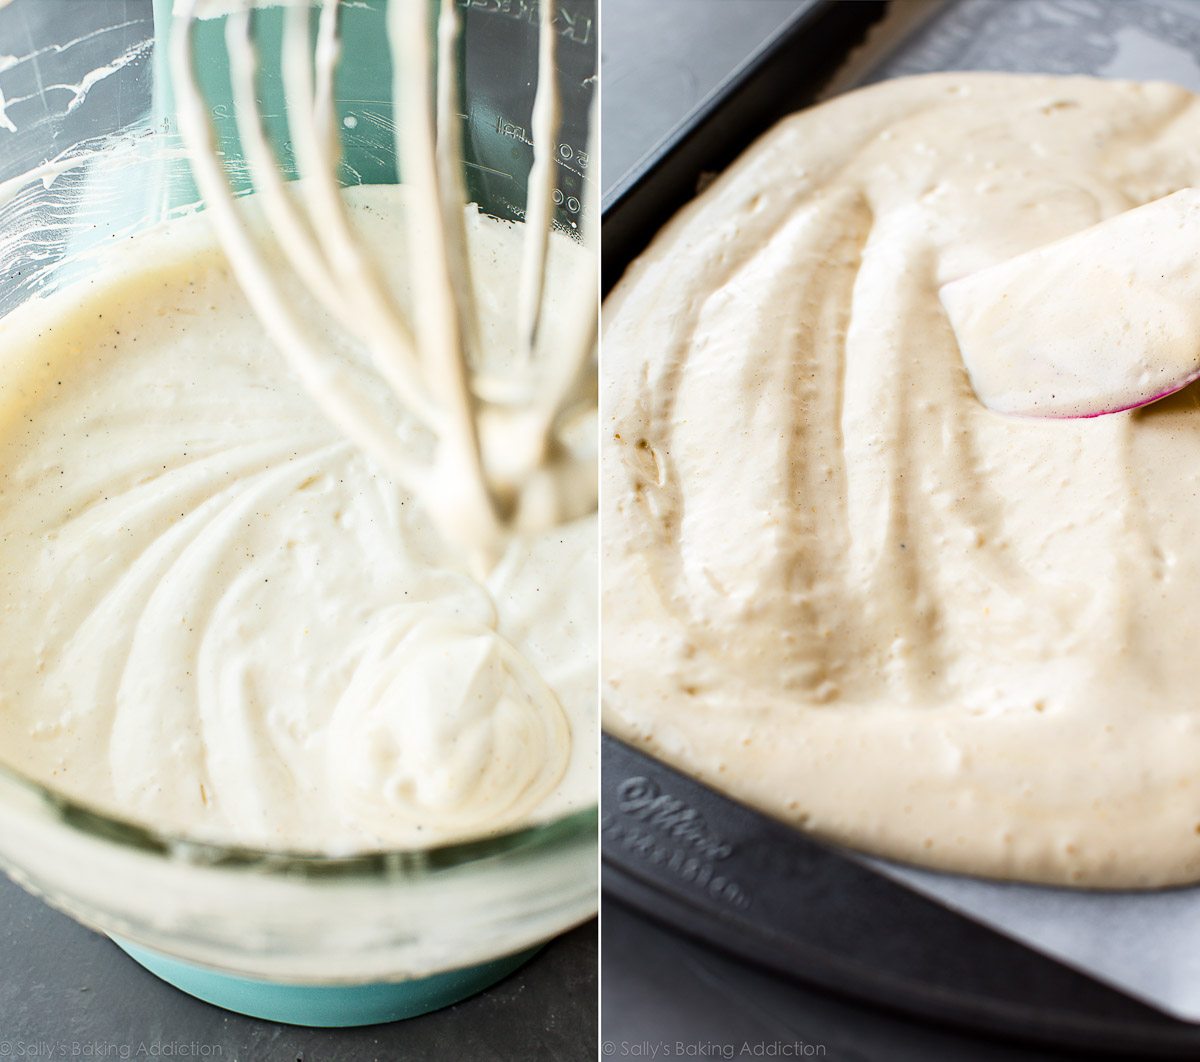 2 images of sponge cake batter in a glass bowl and spreading sponge cake batter into a jelly roll pan